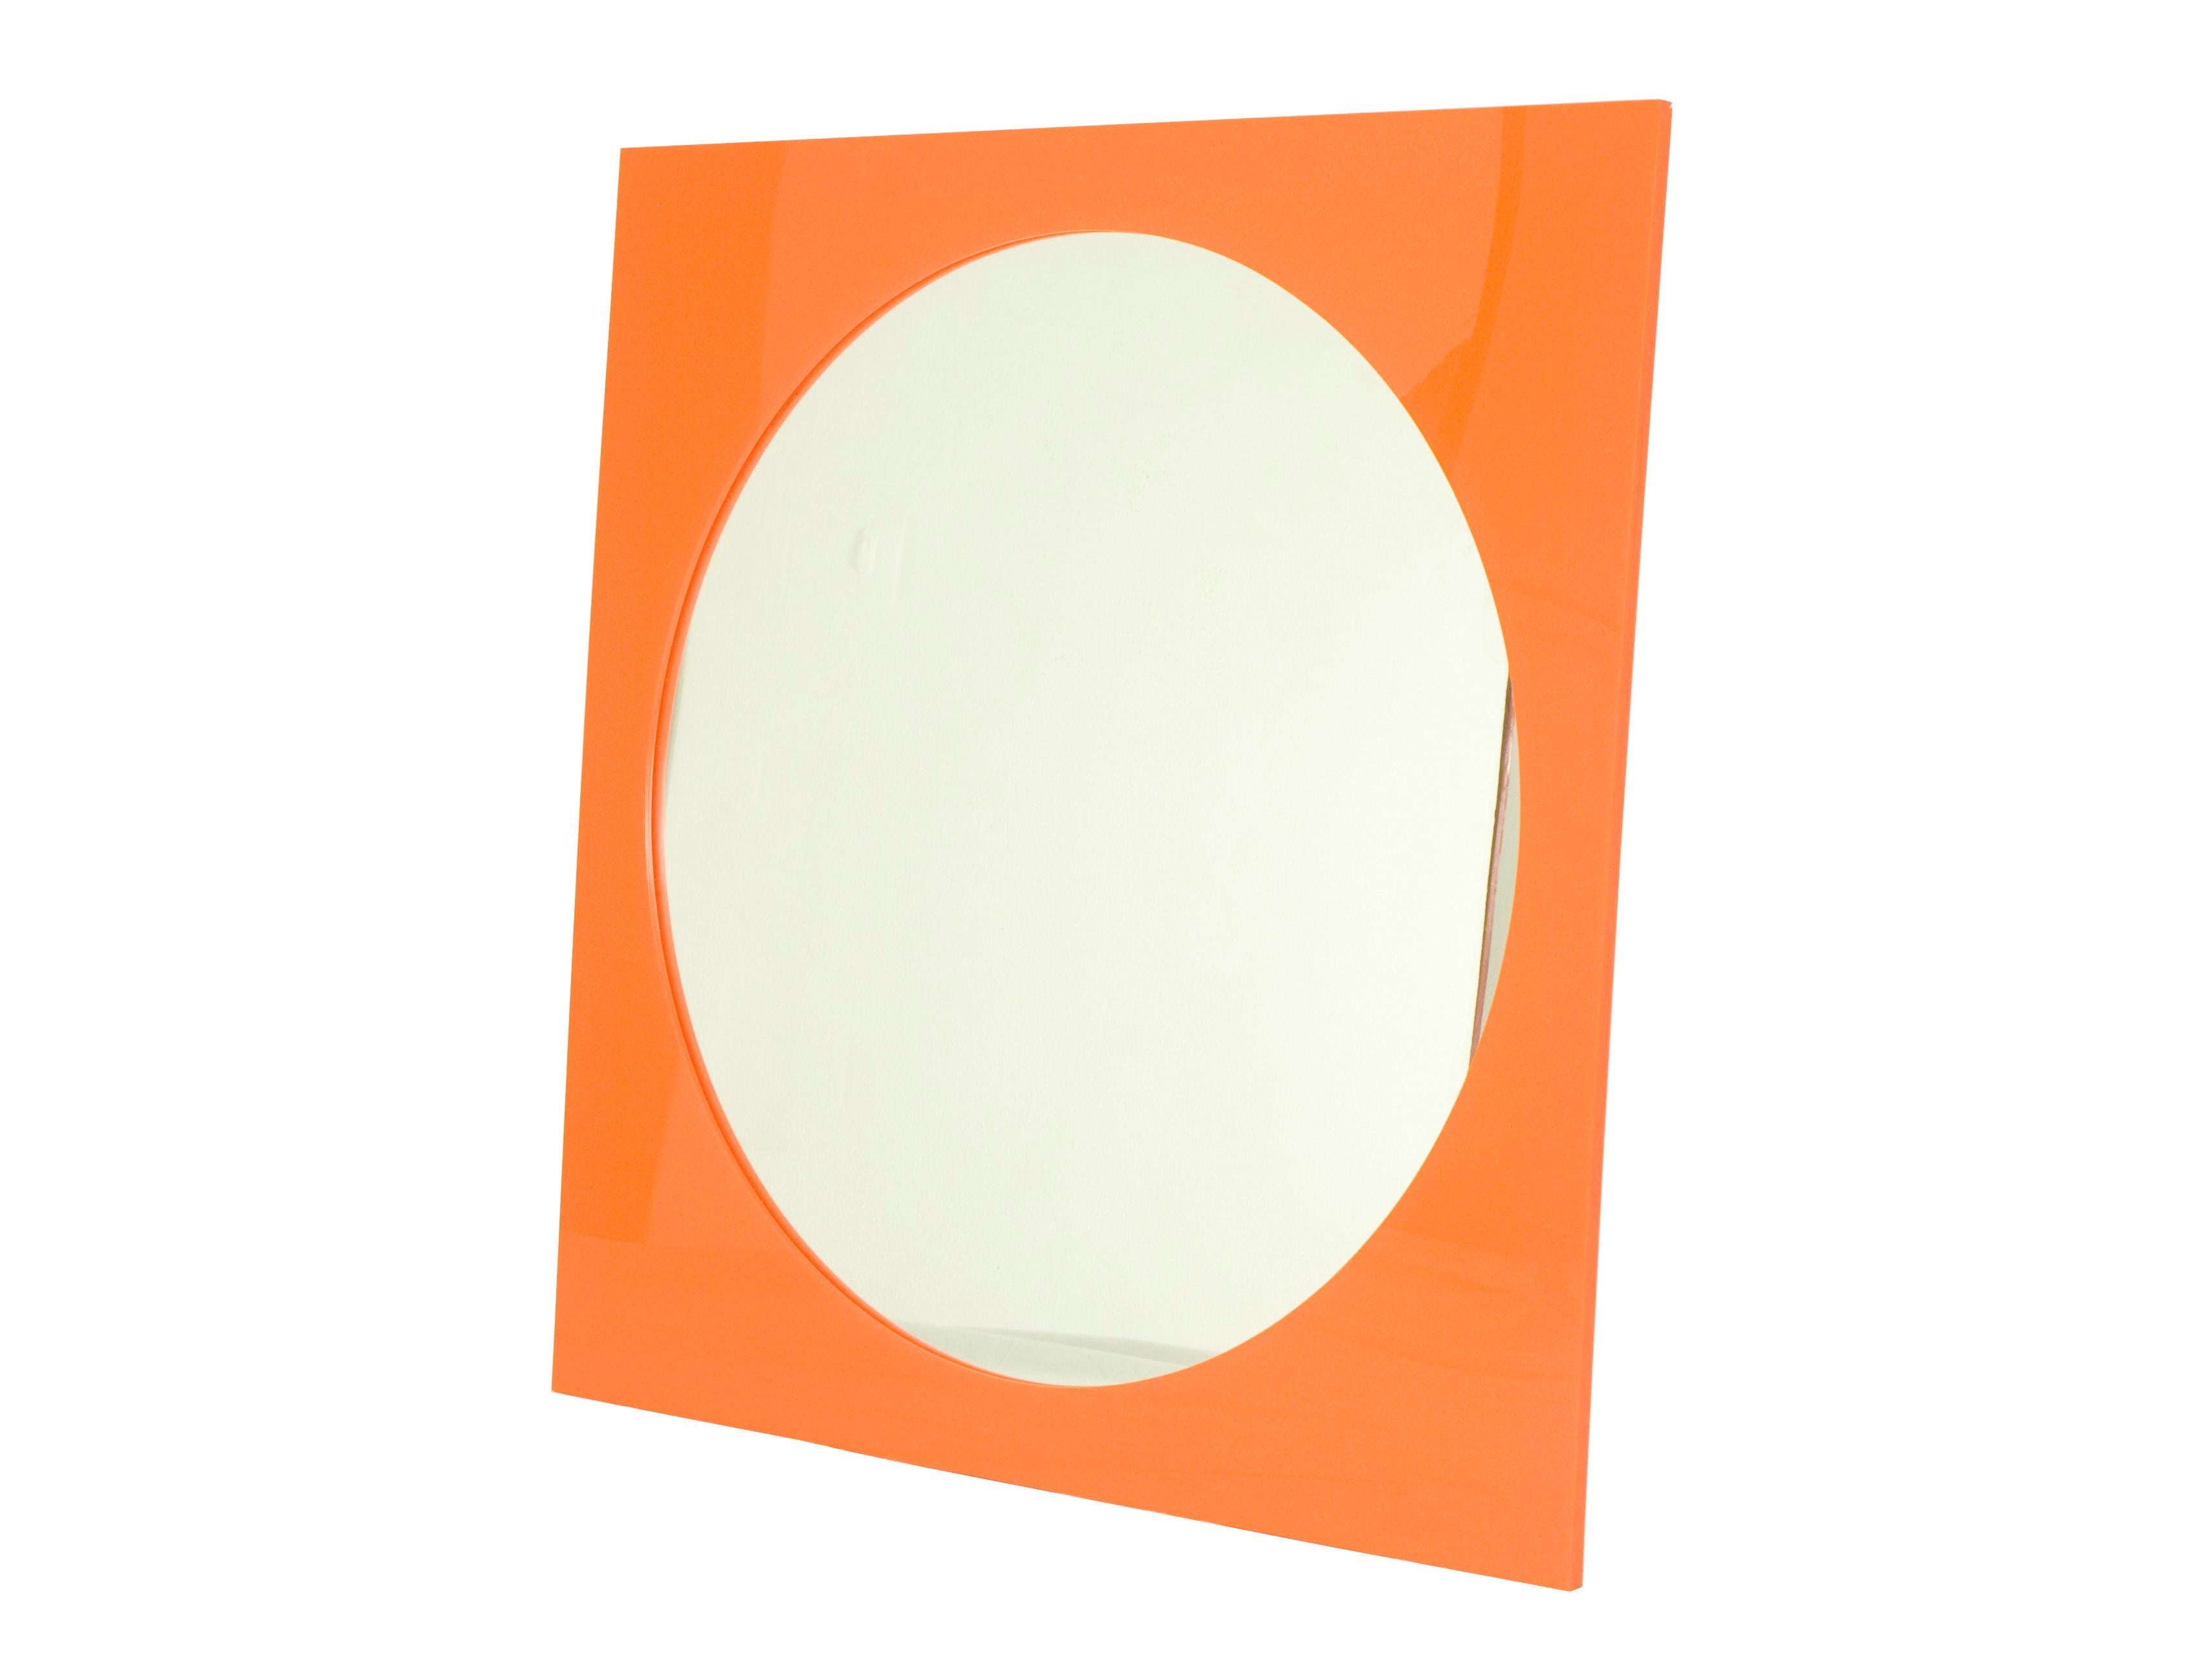 Late 19th Century Orange Methacrylate Square Mirror 4724/5 by G. Stoppino for Kartell